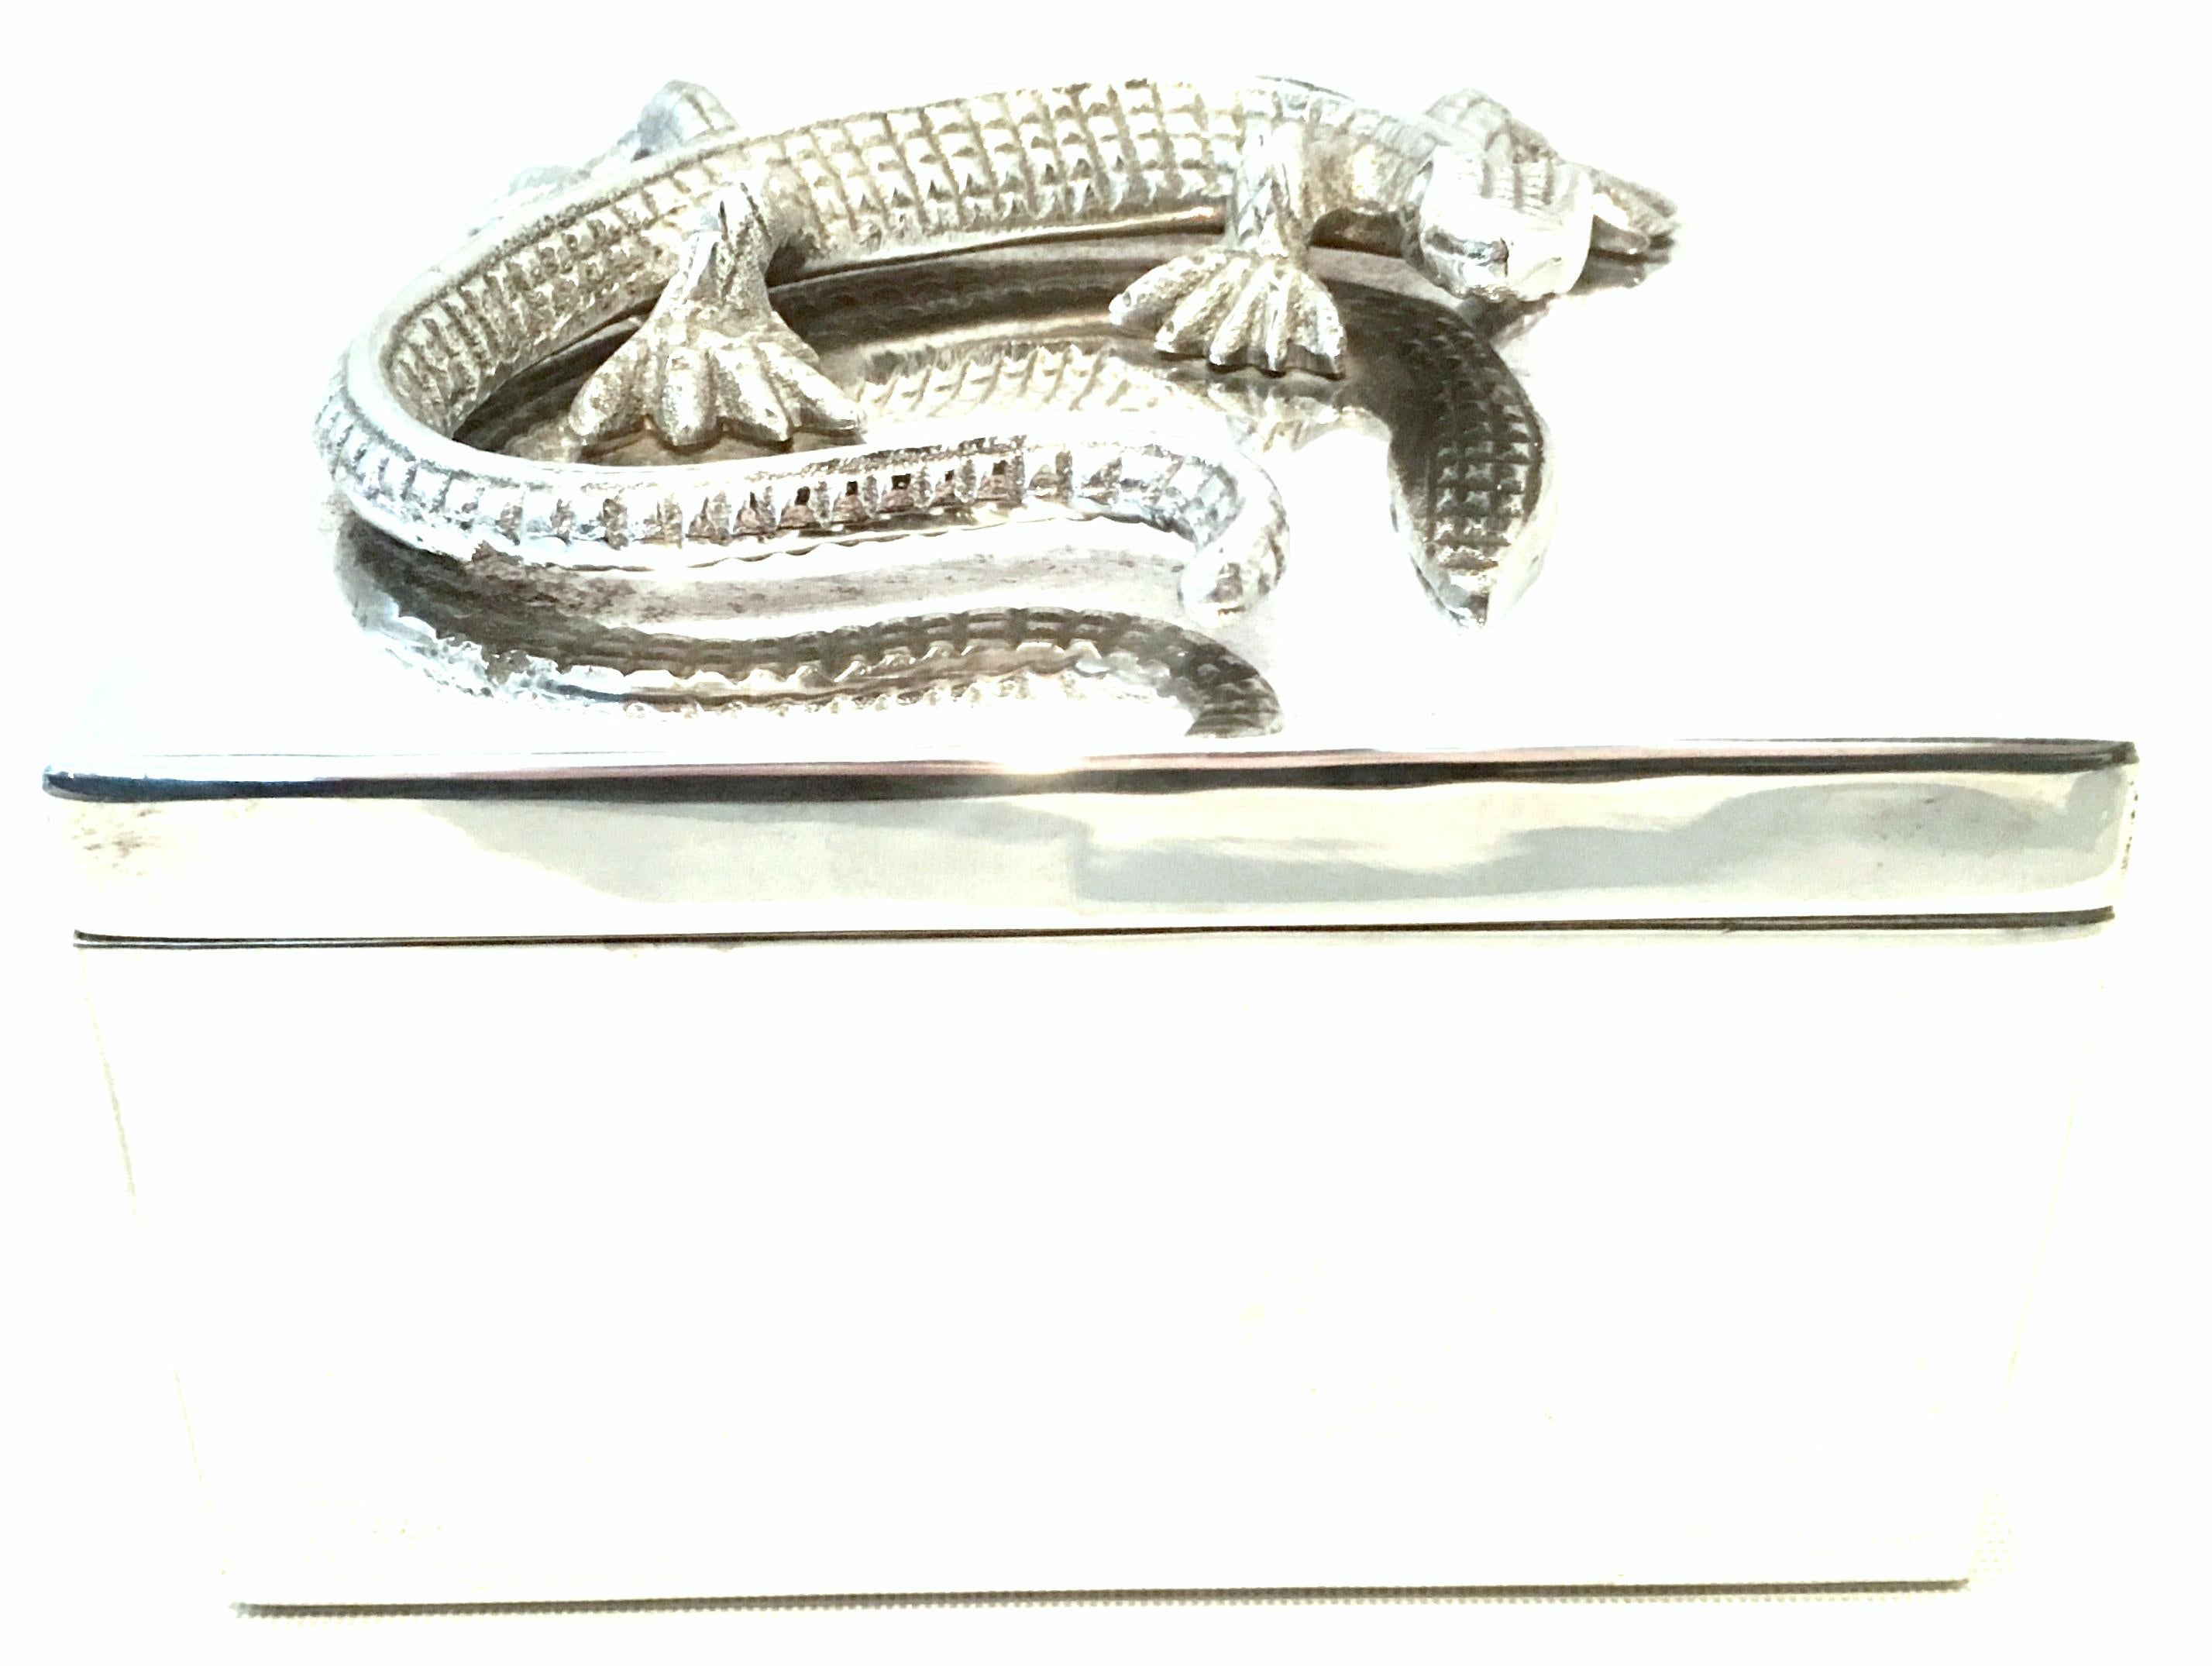 21st Century silver plate lizard box. This silver plate two-piece lidded box features a sculptural and applied lizard form at the top of the lid. The size of lizard is approximately, 6